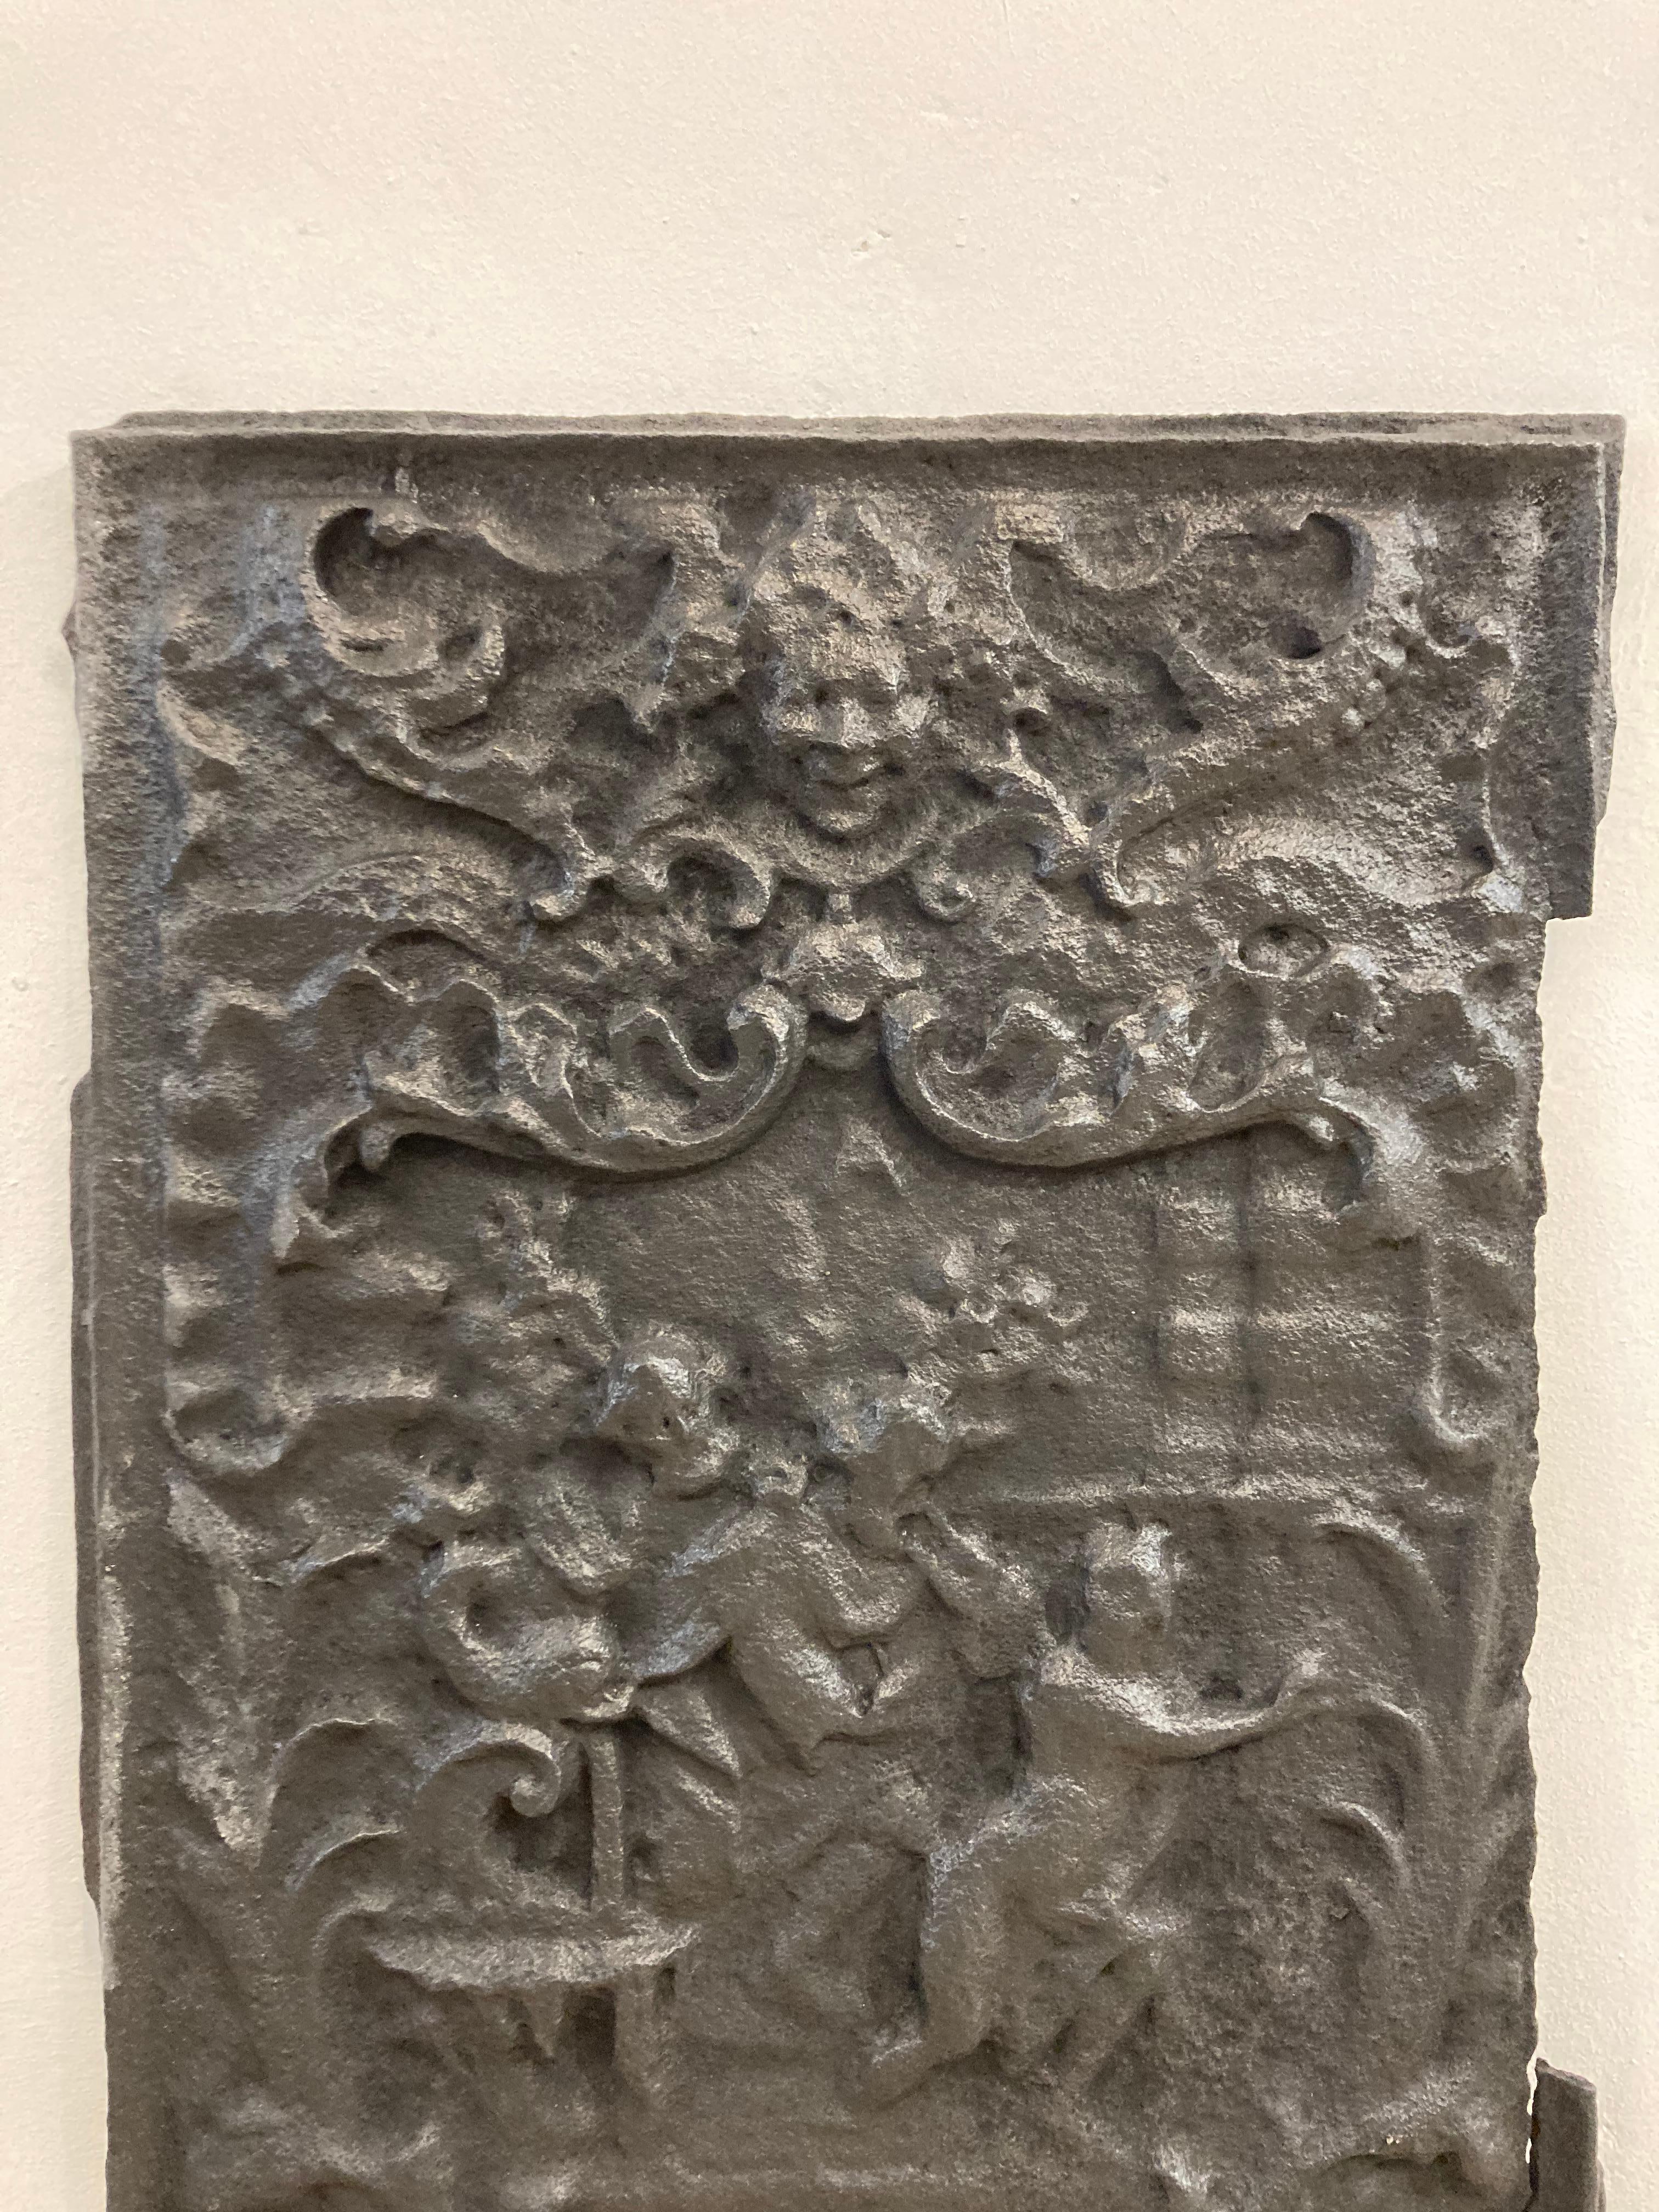 Superb tal cast iron fireback or backsplash.
This beautifully detailed fireback was originally a piece of a 17th century stove.
These were taken apart and sold separately.

Beautiful piece, shows its age.